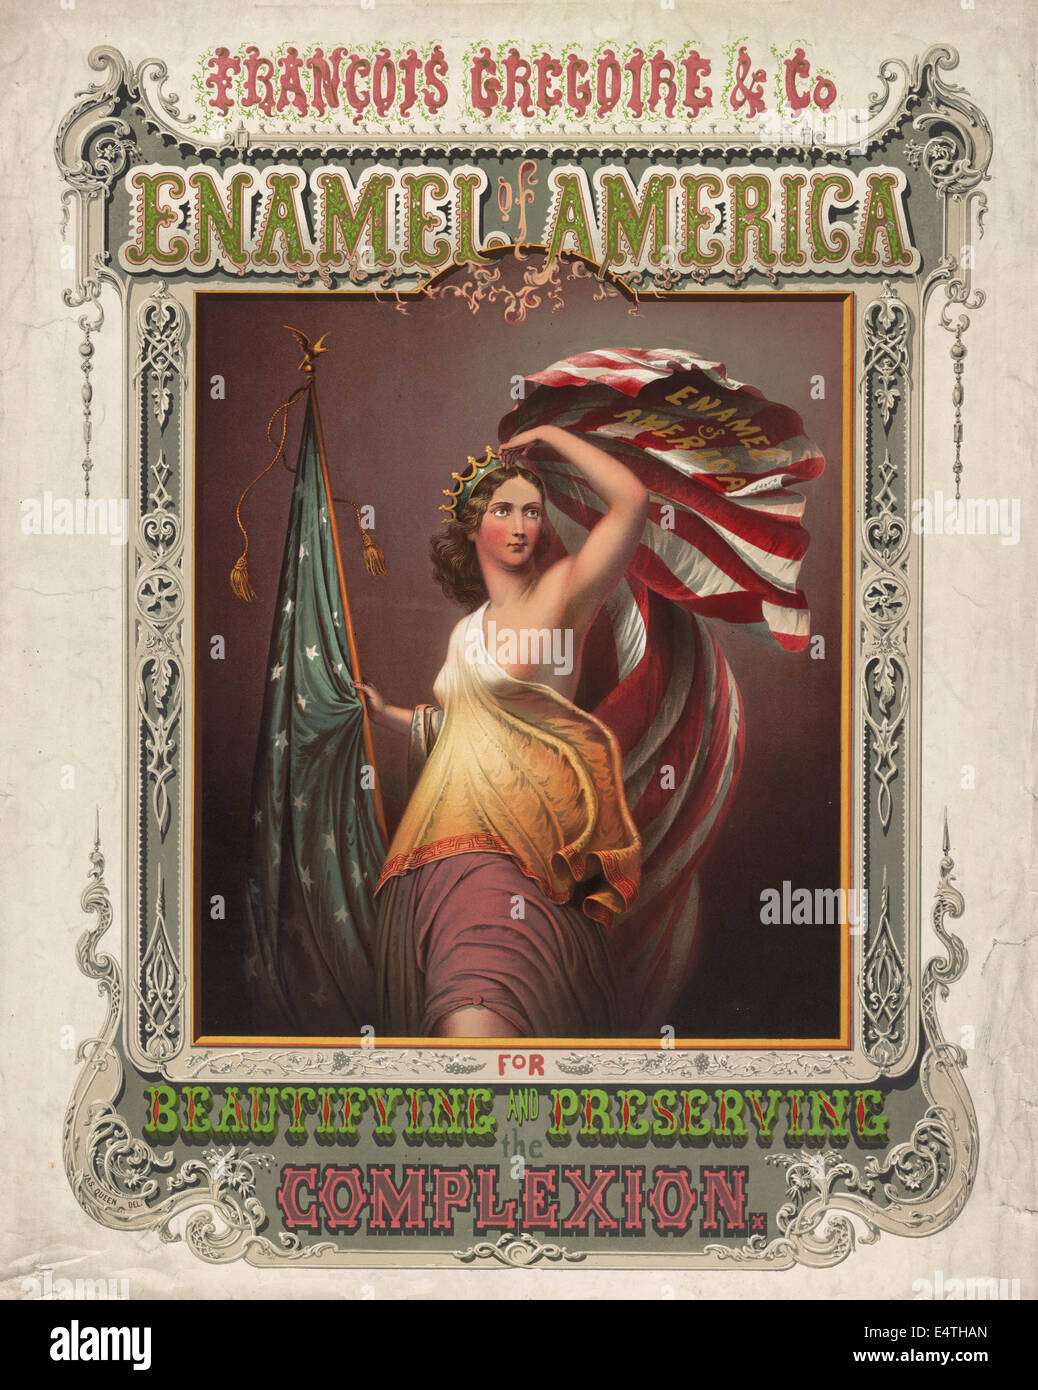 François Gregoire & Co. enamel of America for beautifying and preserving the complexion - an advertising broadsheet for 'François Gregoire & Co.', with a female figure as Columbia holding an American Flag that is labeled 'Enamel of America', circa 1866 Stock Photo